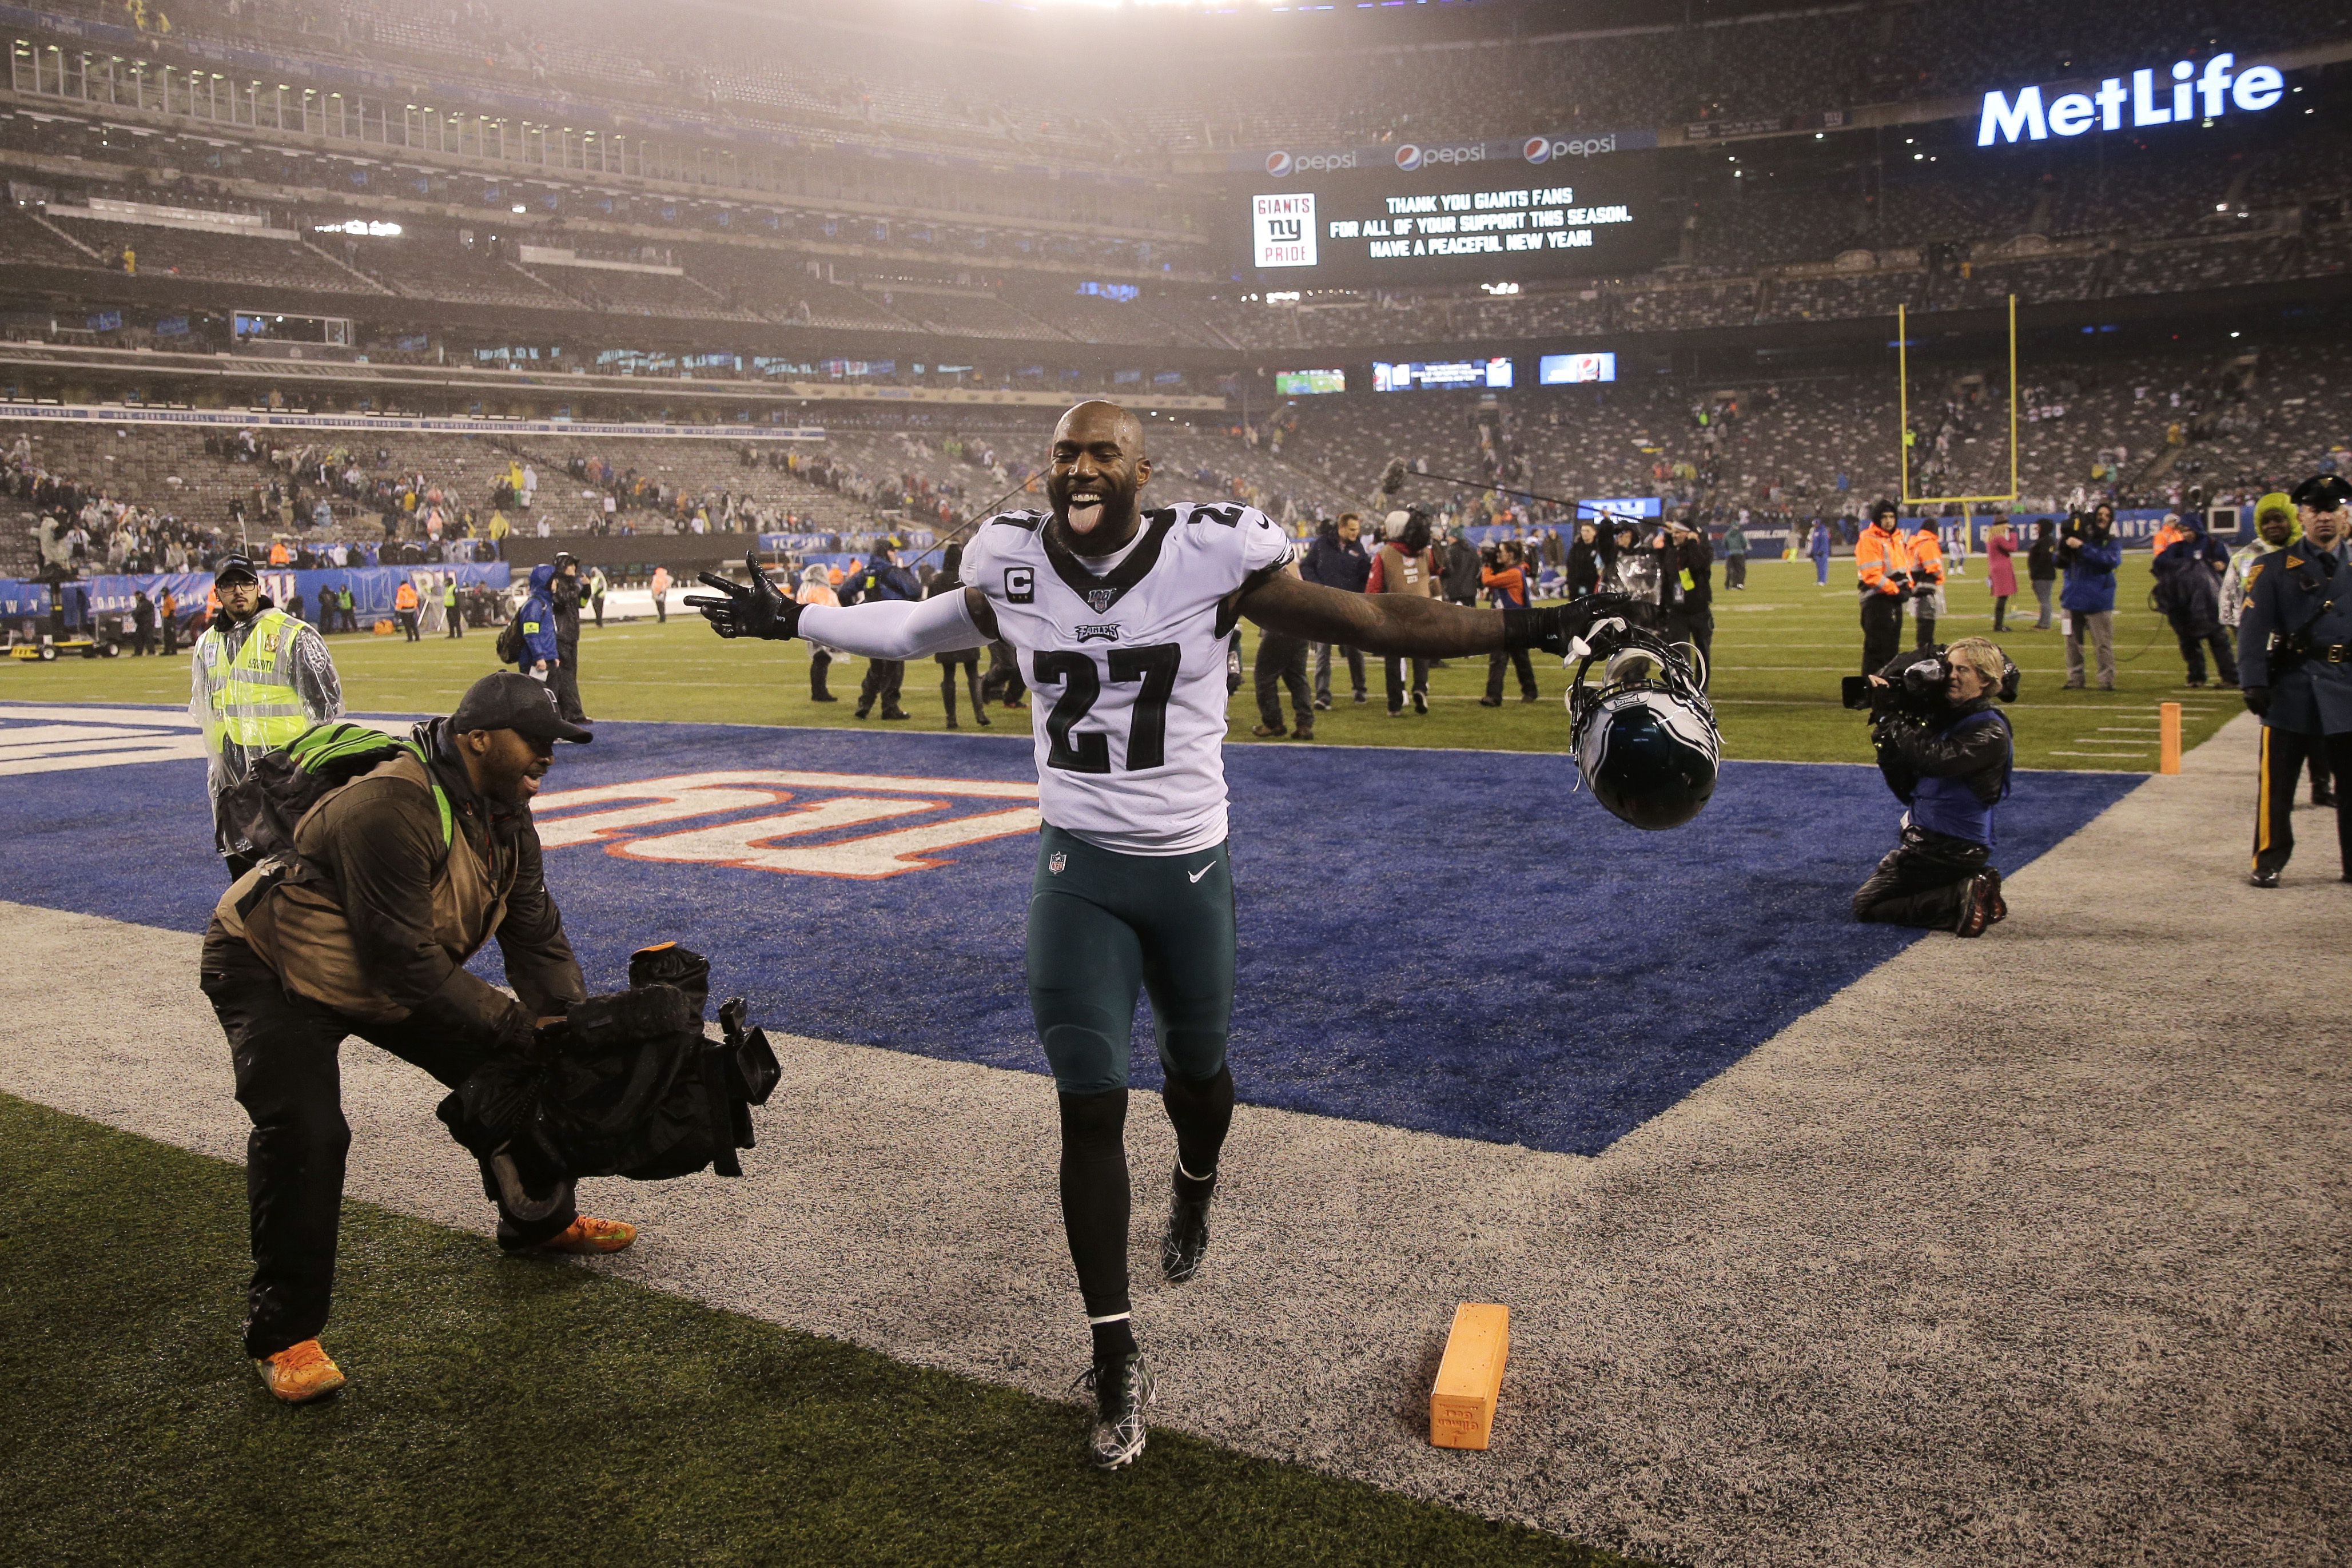 Eagles beat Giants 34-17 to clinch NFC East - NBC Sports